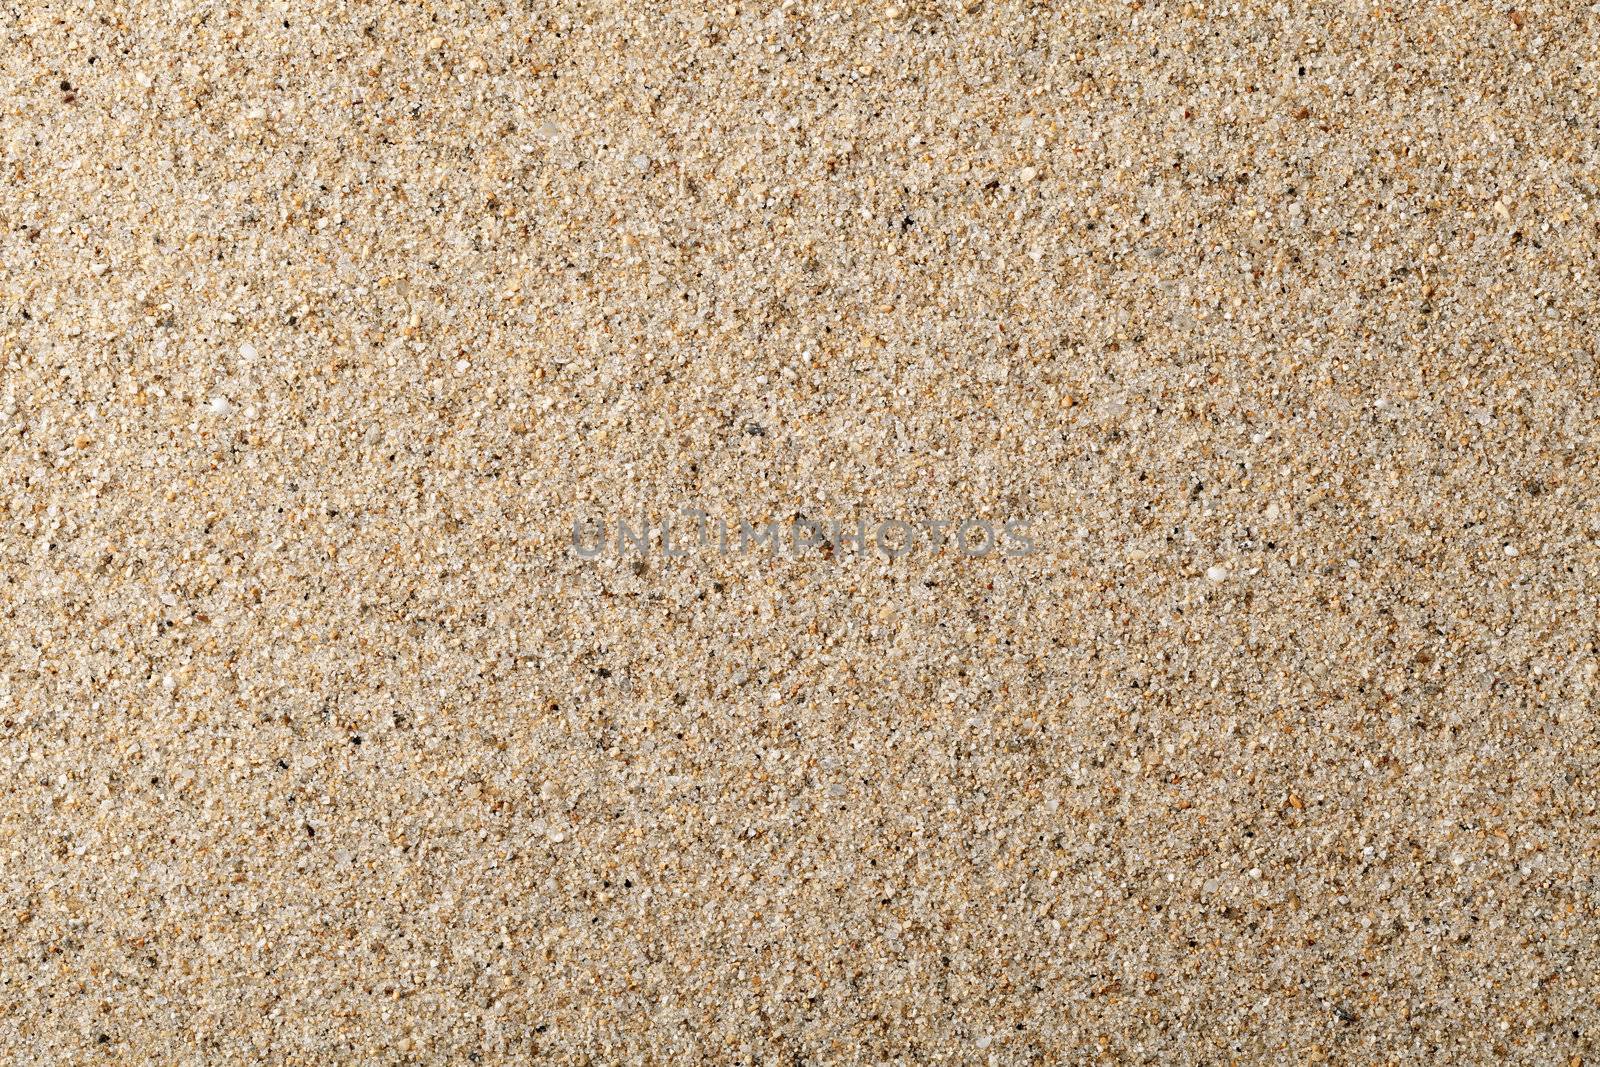 Sand texture for background. Close up, top view